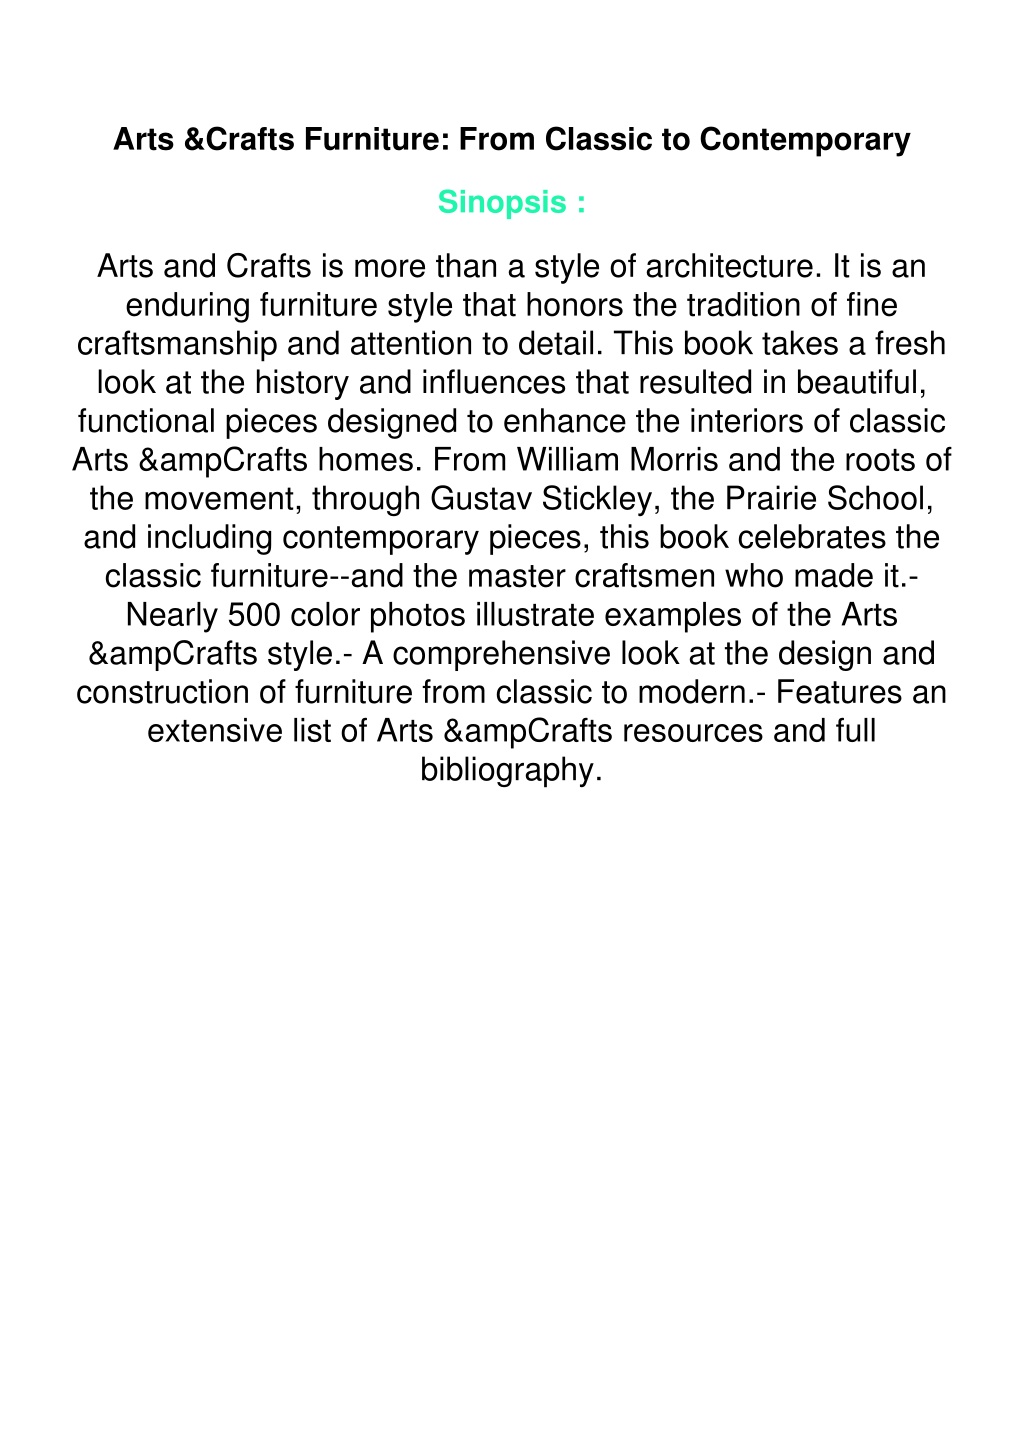 PPT - PDF_ Arts & Crafts Furniture: From Classic to Contemporary ...